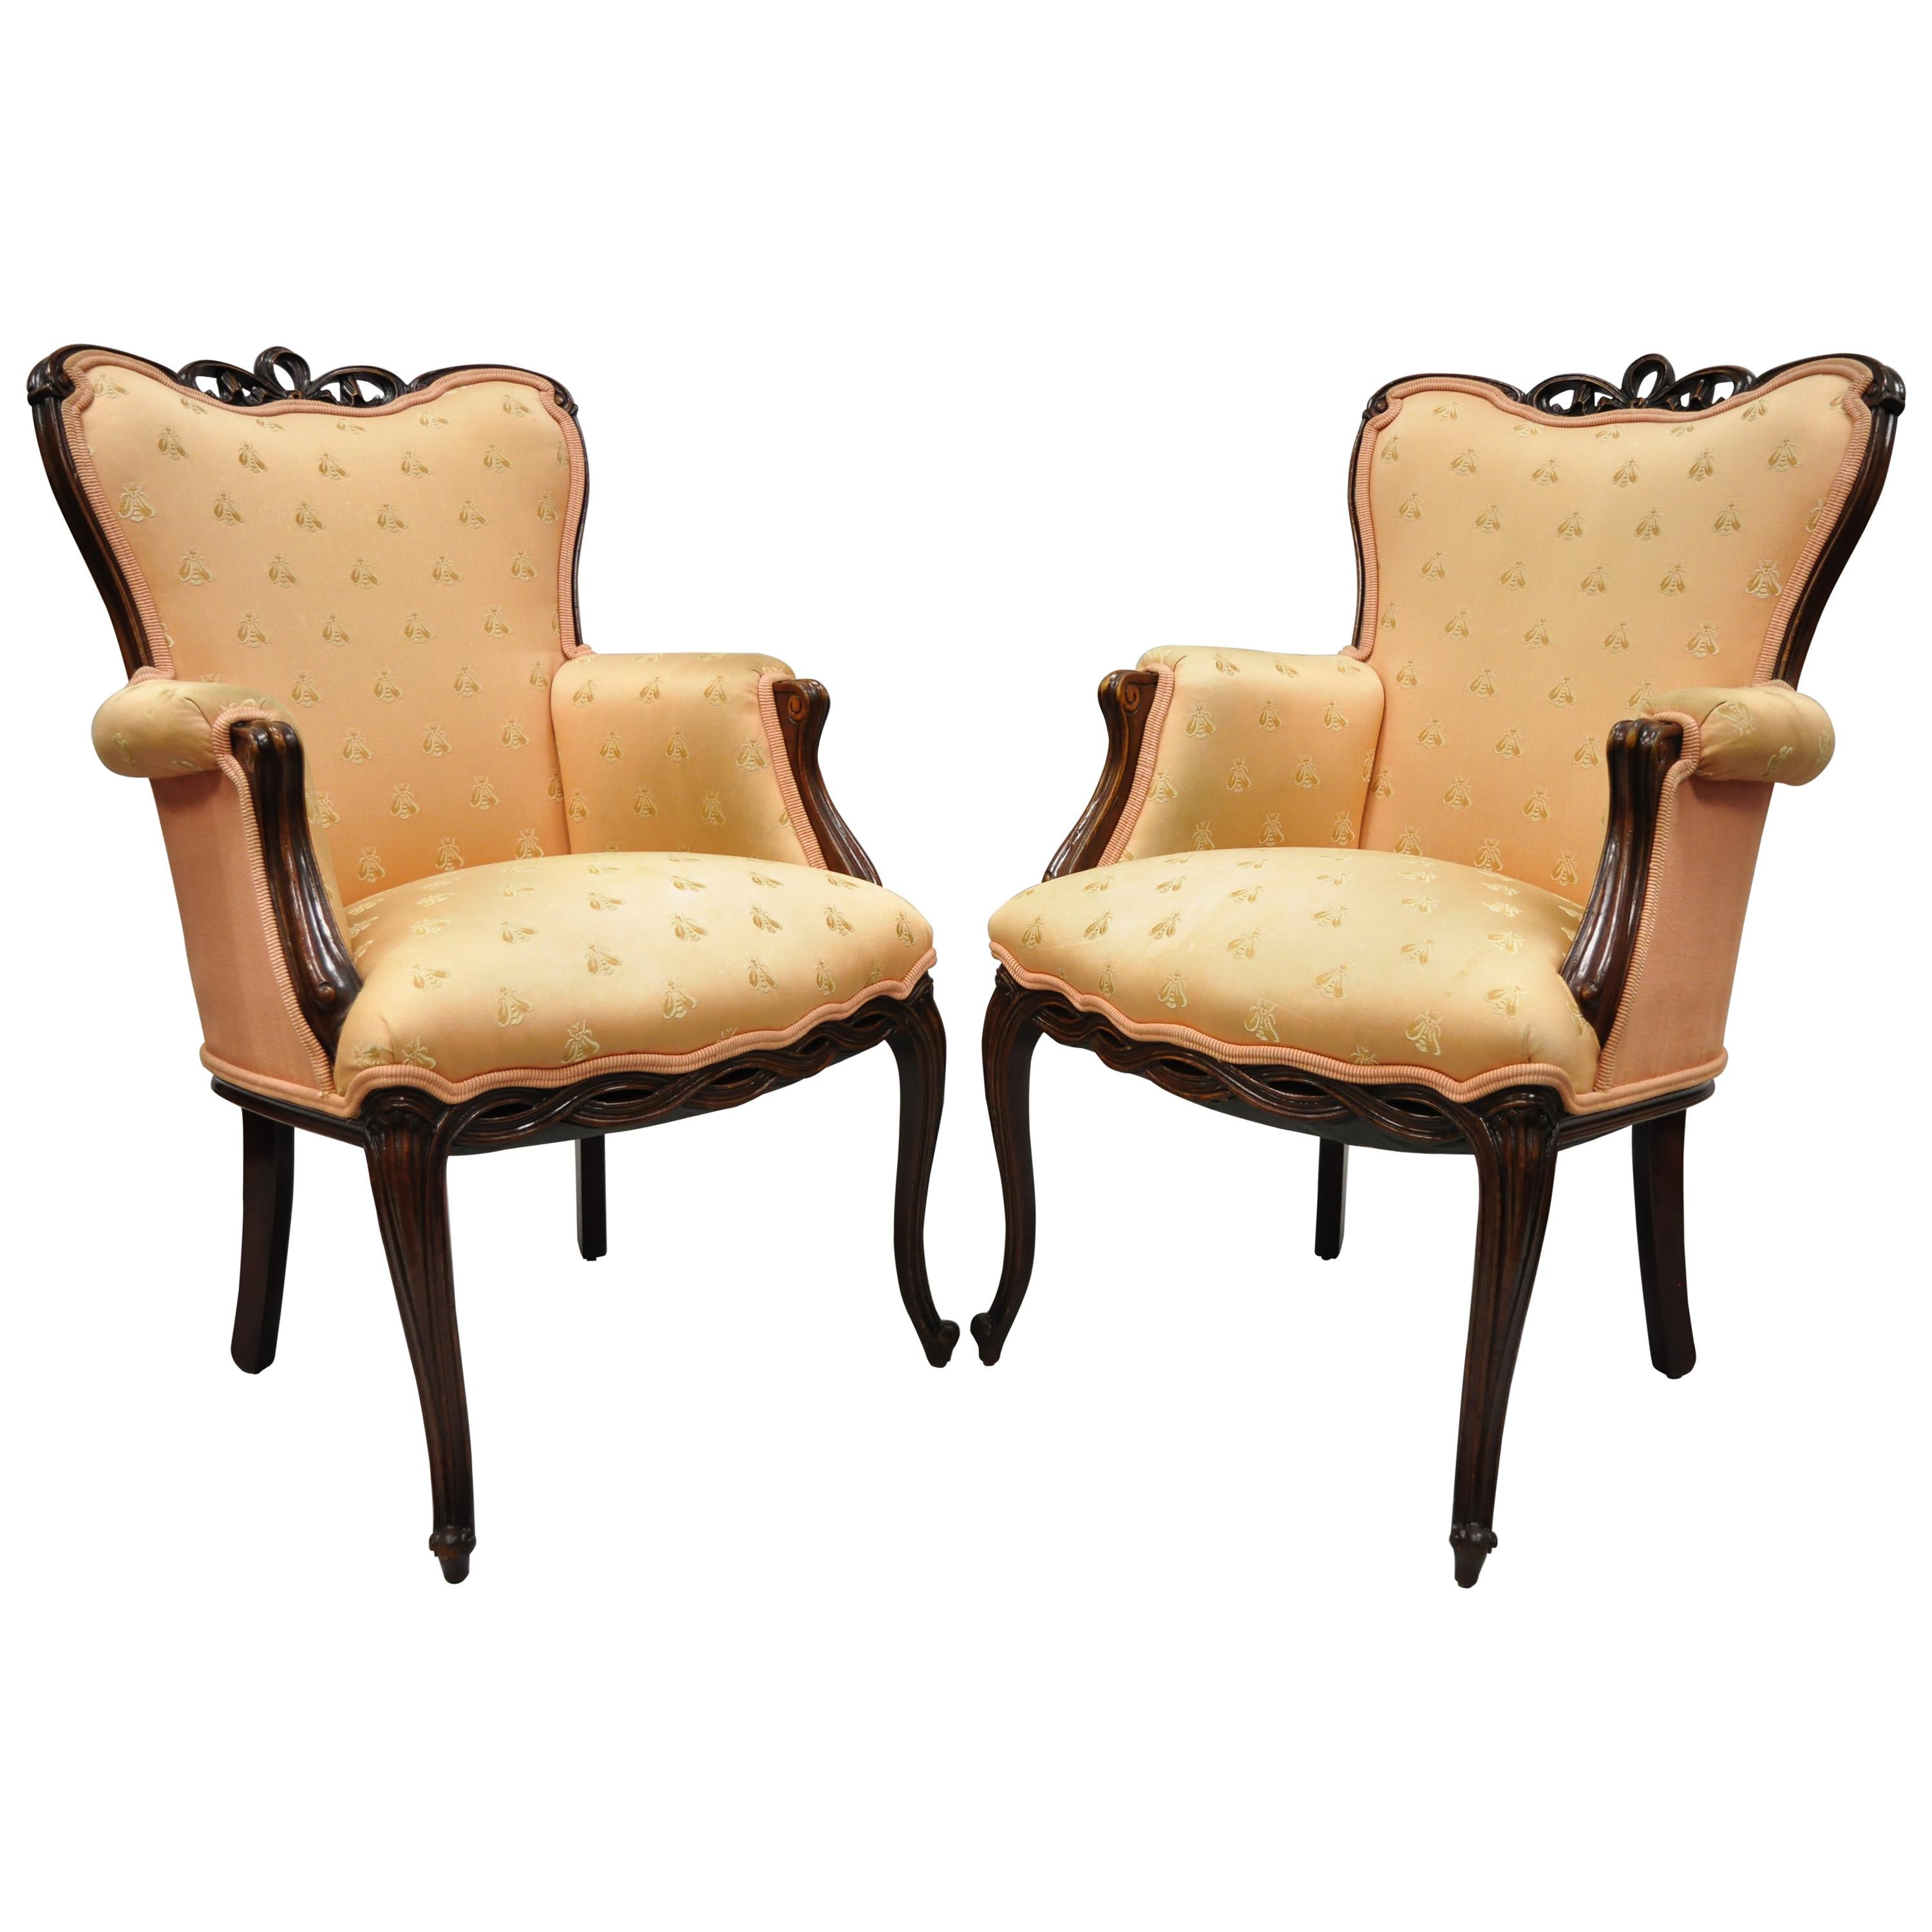 Pair of French Hollywood Regency Victorian Upholstered Fireside Lounge Armchairs